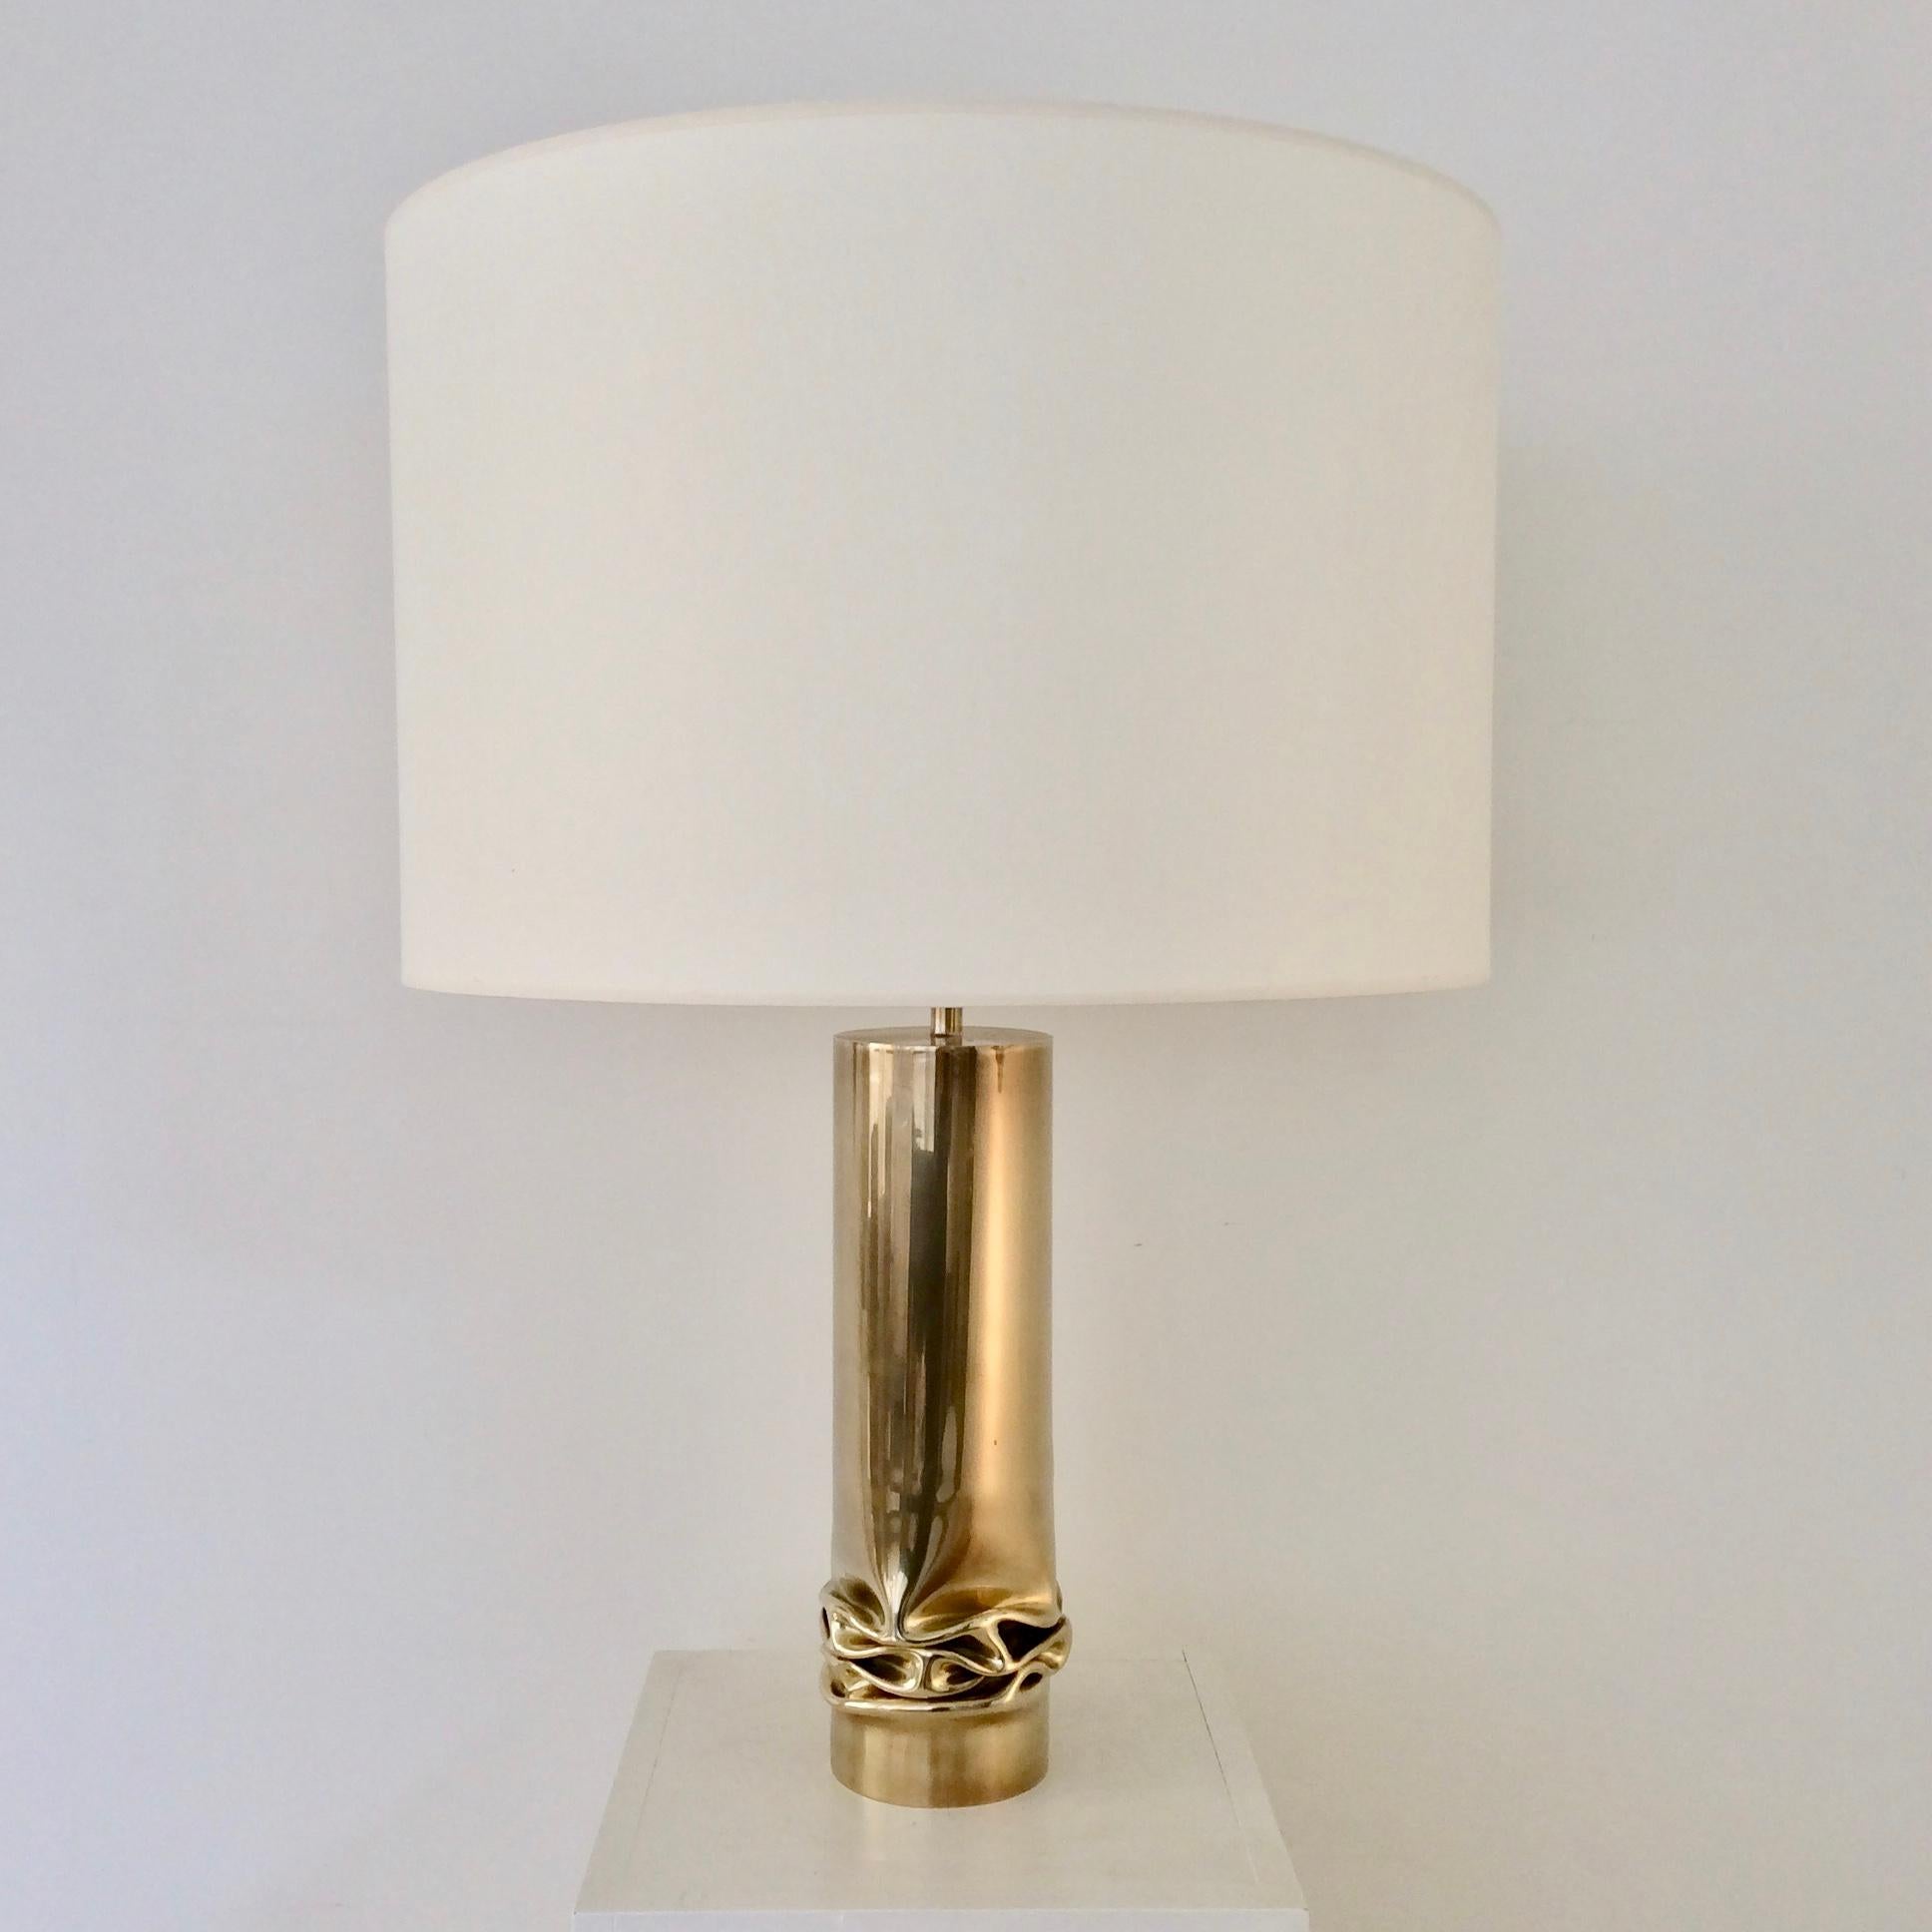 French Jacques Moniquet Brass Table Lamp, Cheret Edition, circa 1975, France